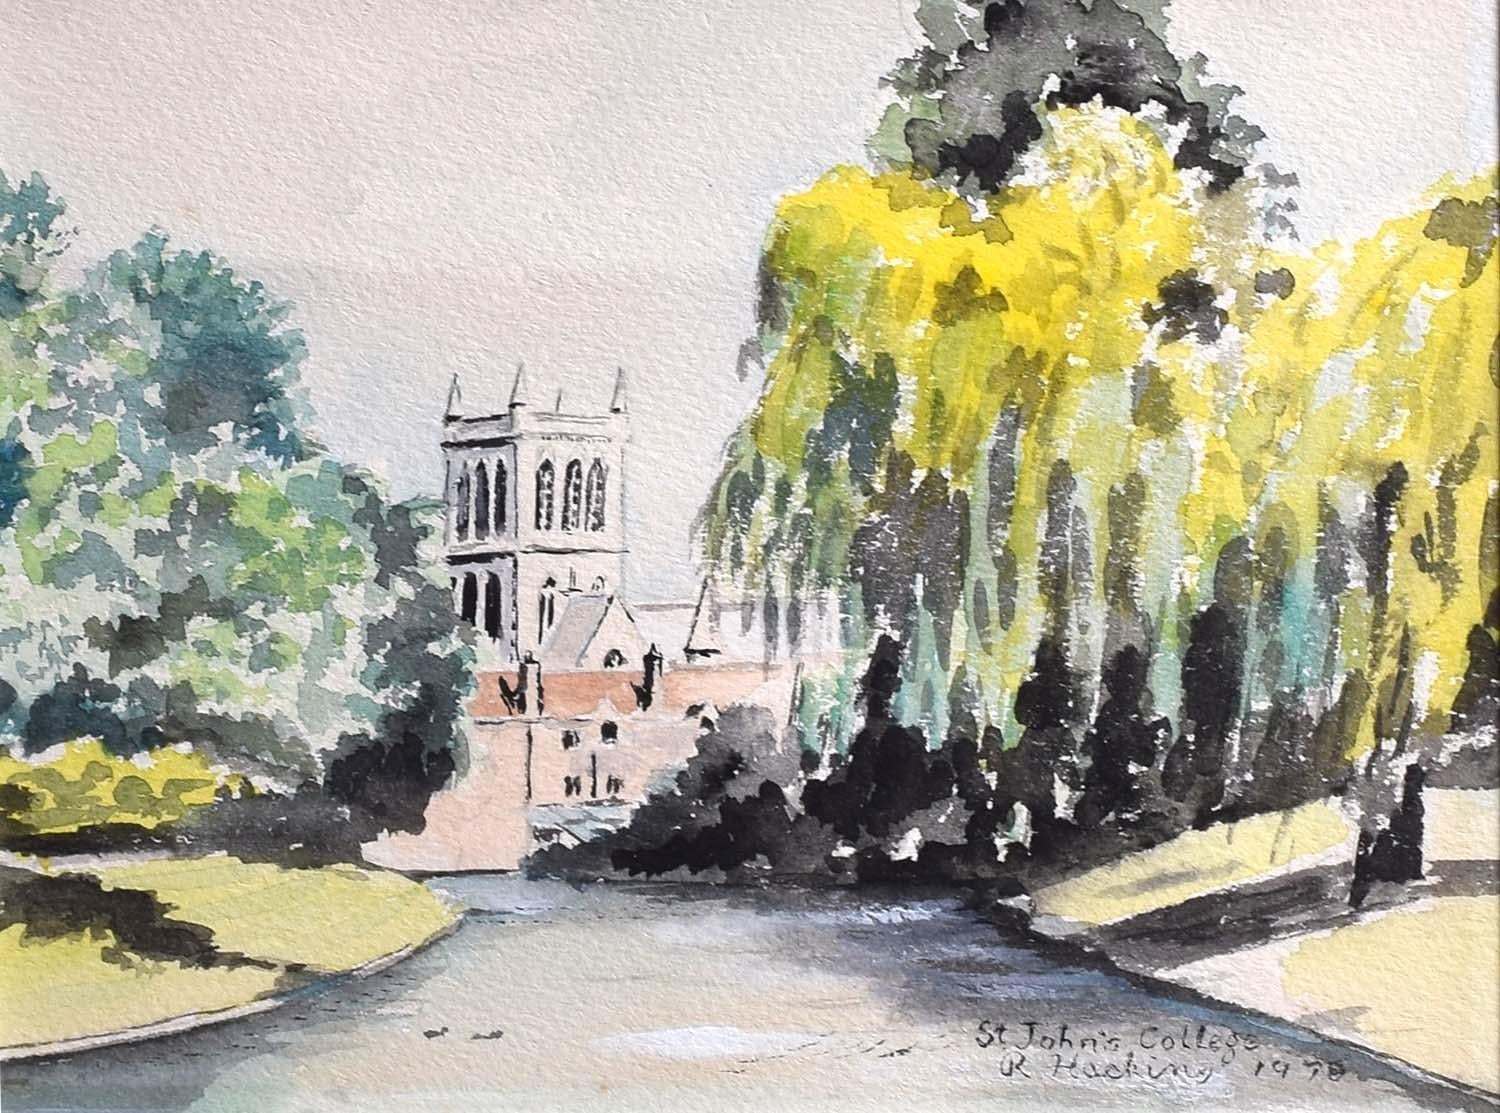 St. John’s College Cambridge from River Cam 1978 Watercolour 'R Hacking'